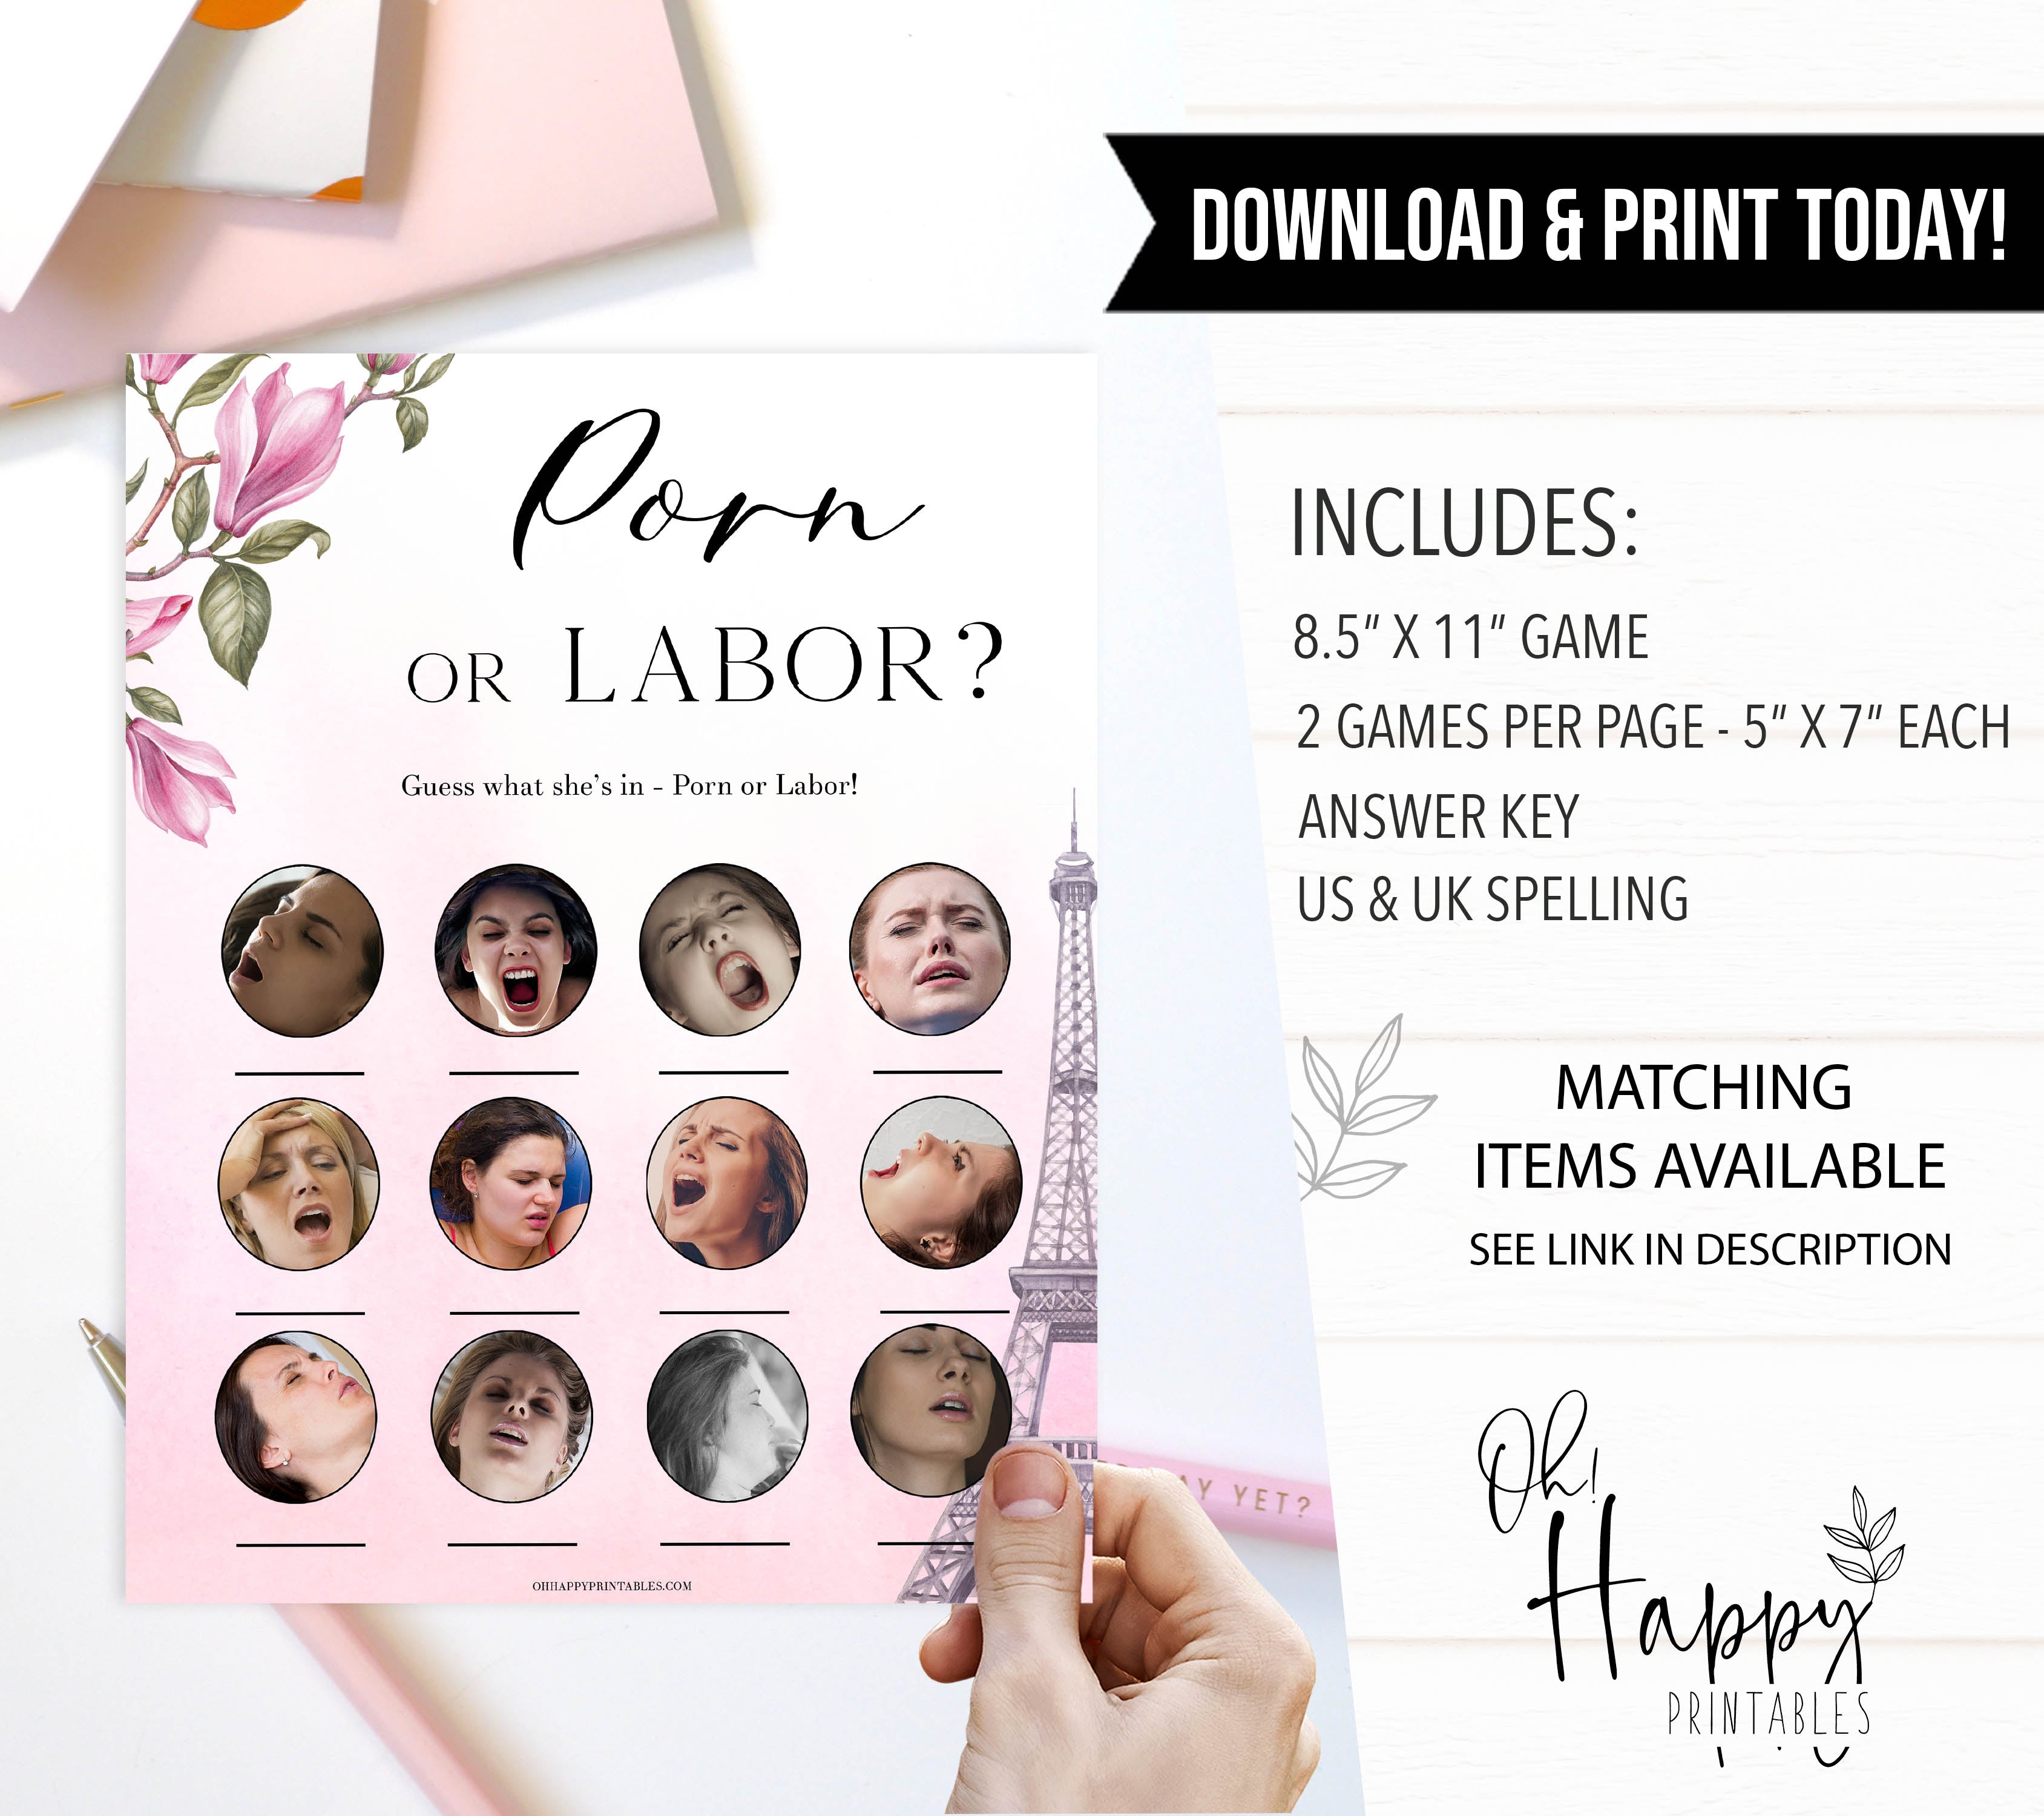 porn or labour baby game, Paris baby shower games, printable baby shower games, Parisian baby shower games, fun baby shower games